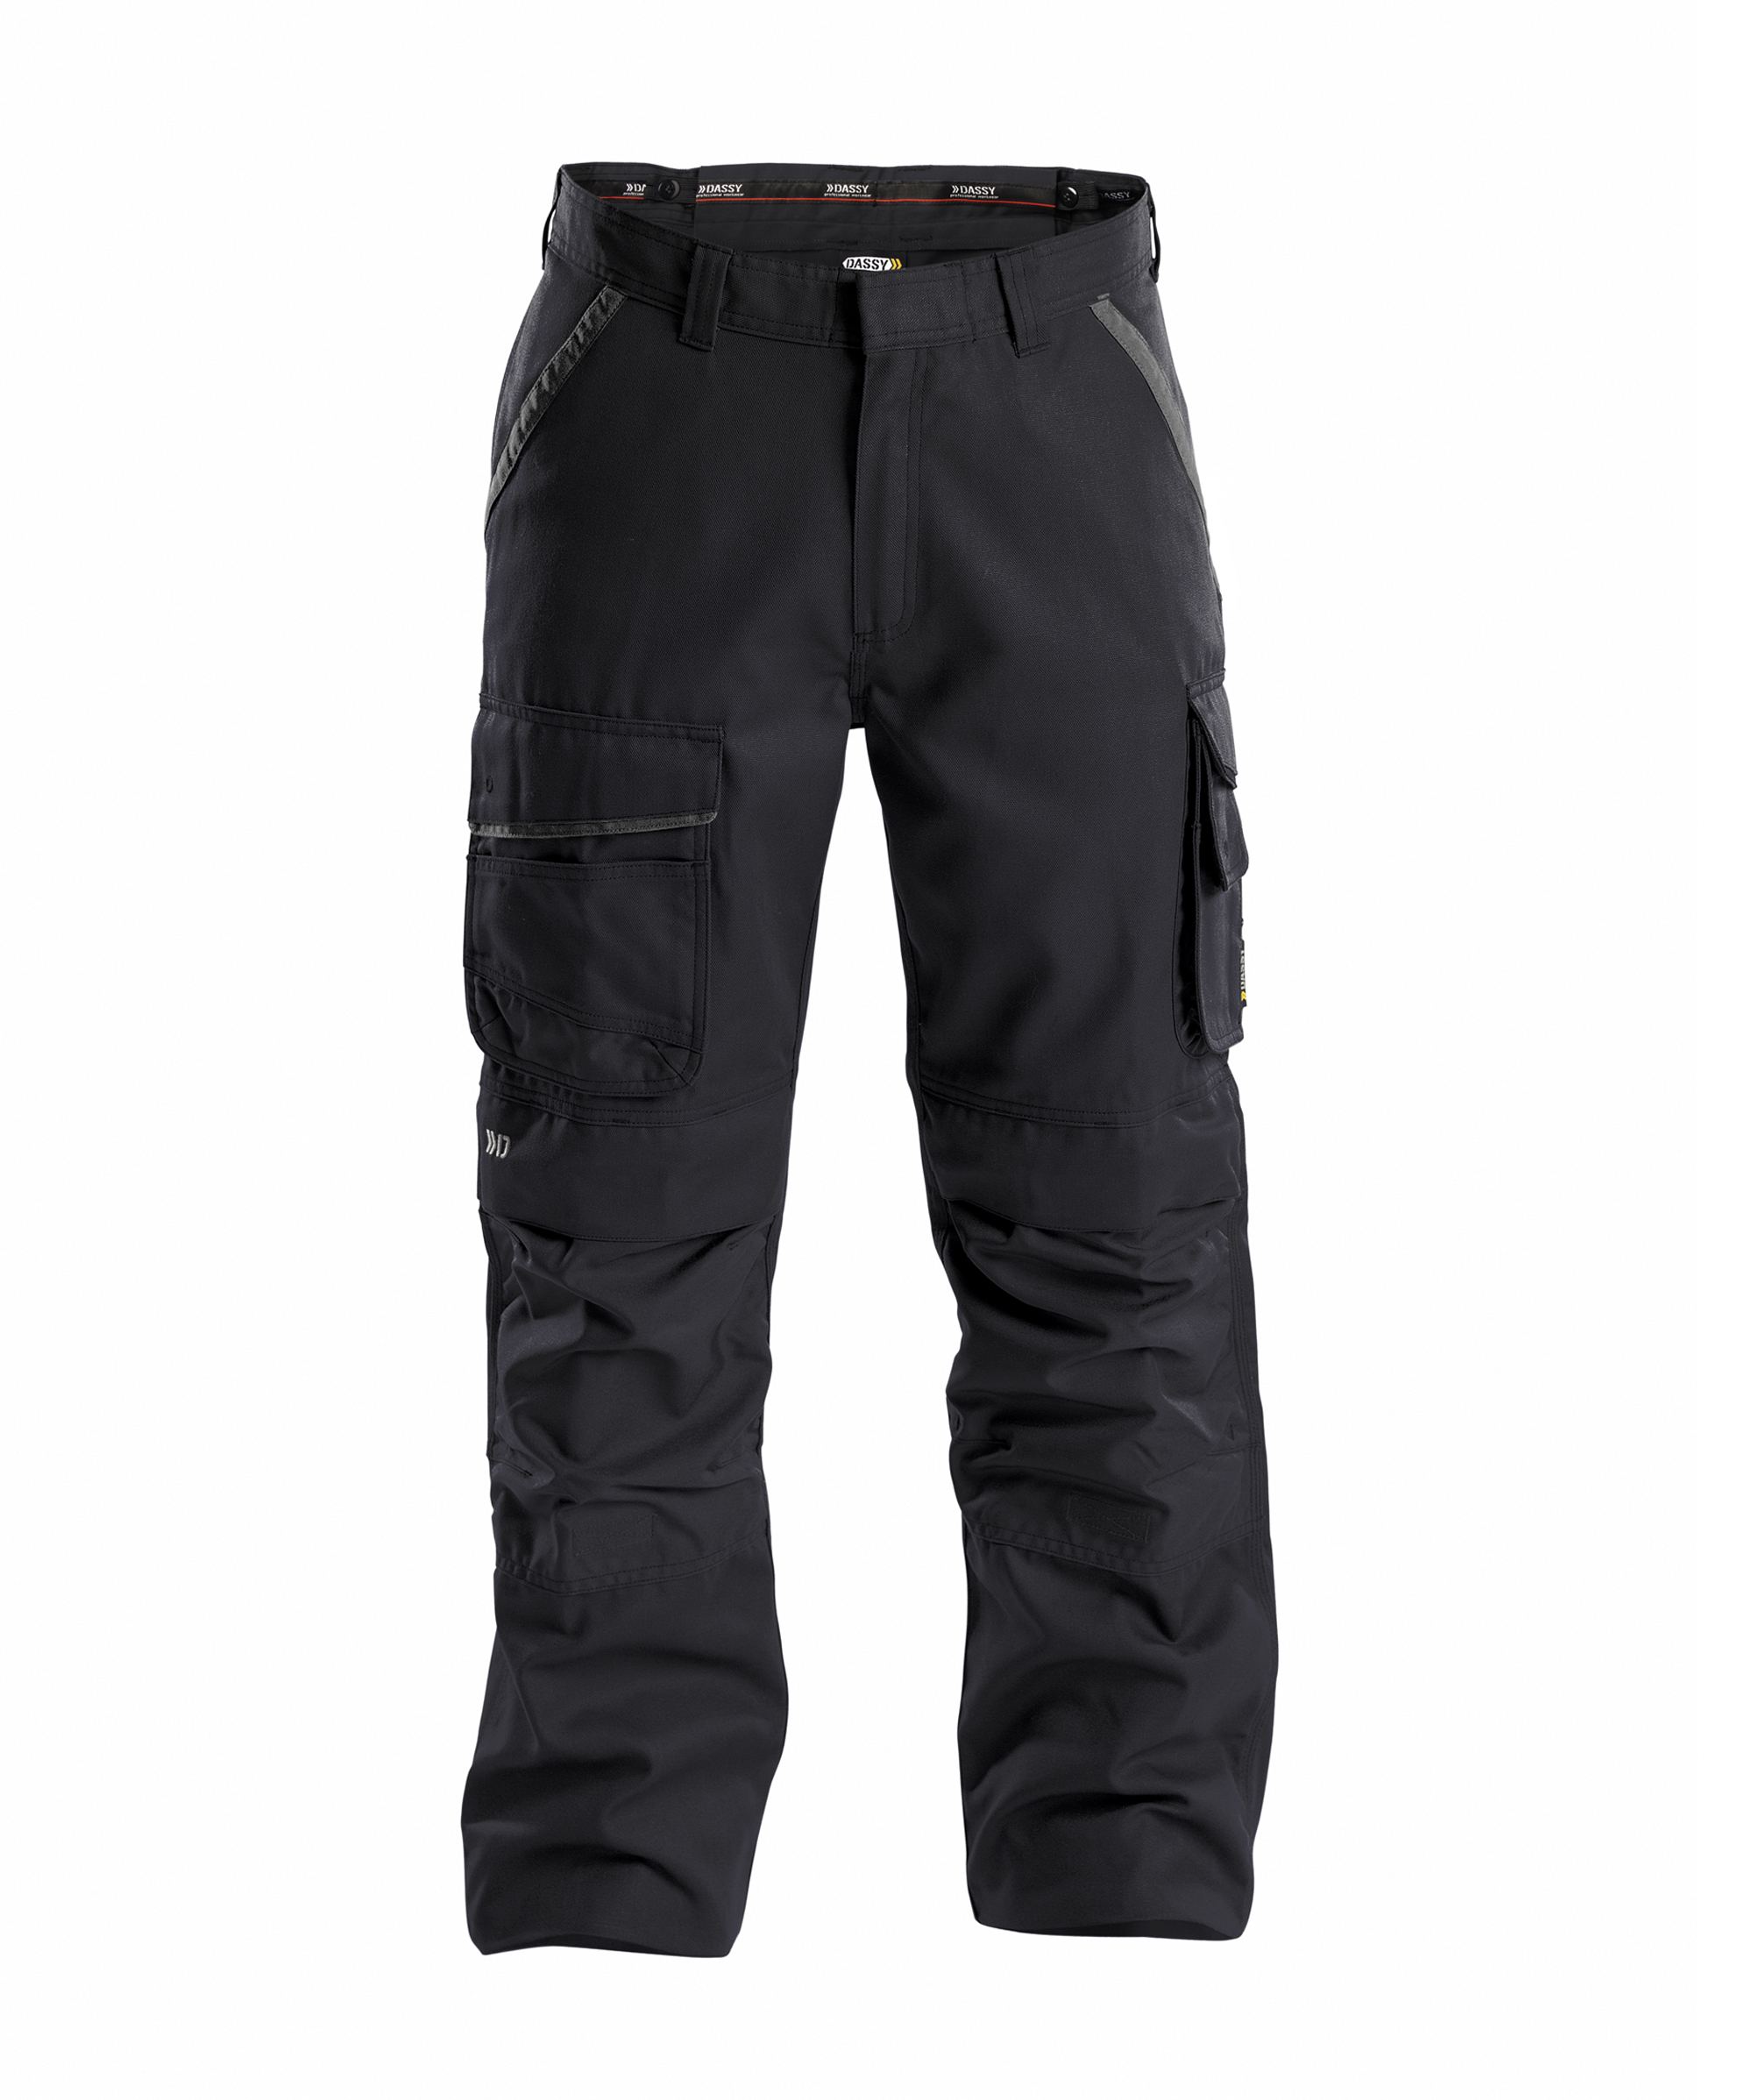 Dassy Connor Work Trousers